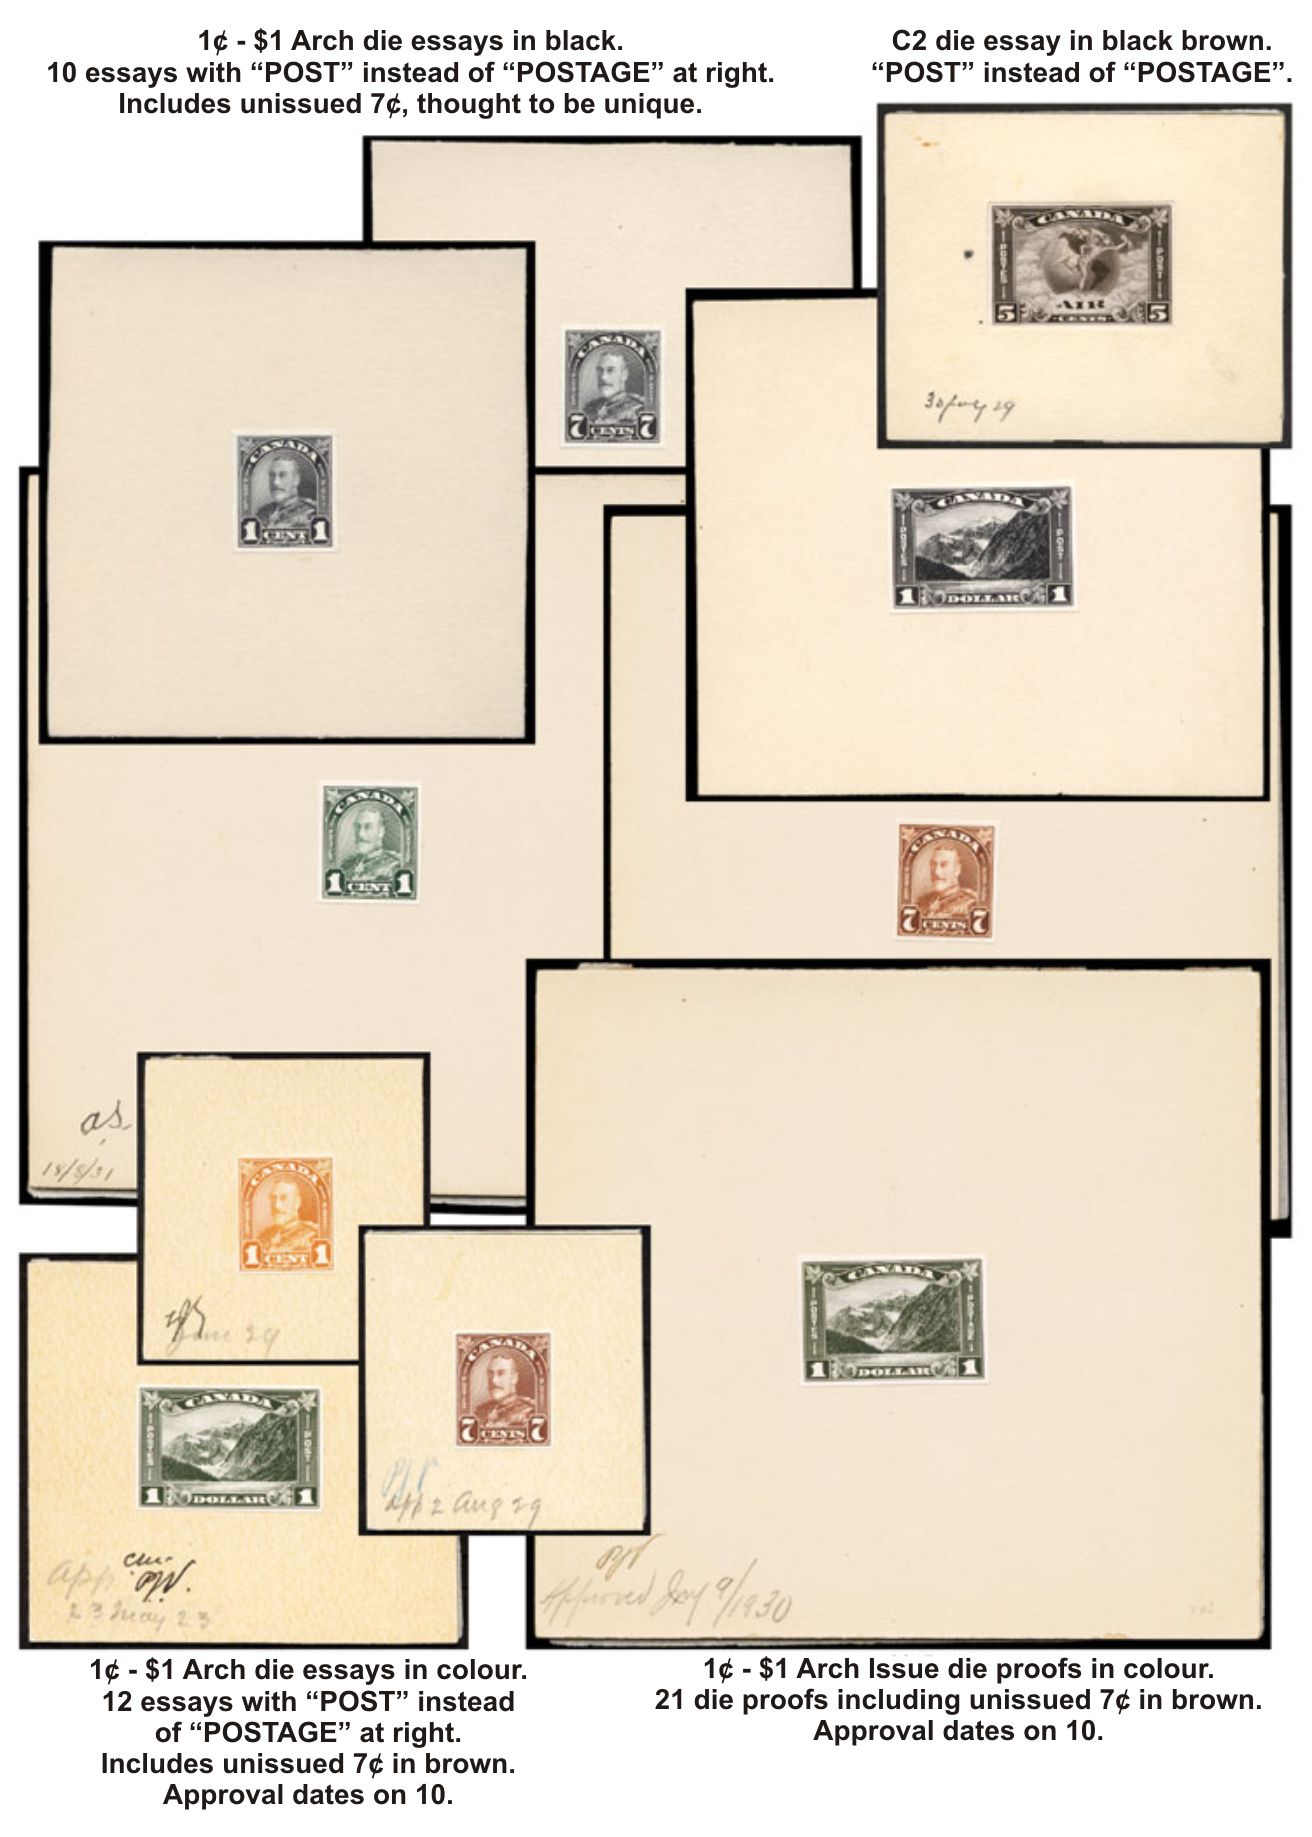 Die proofs of the 1930 King George V Arch Issue